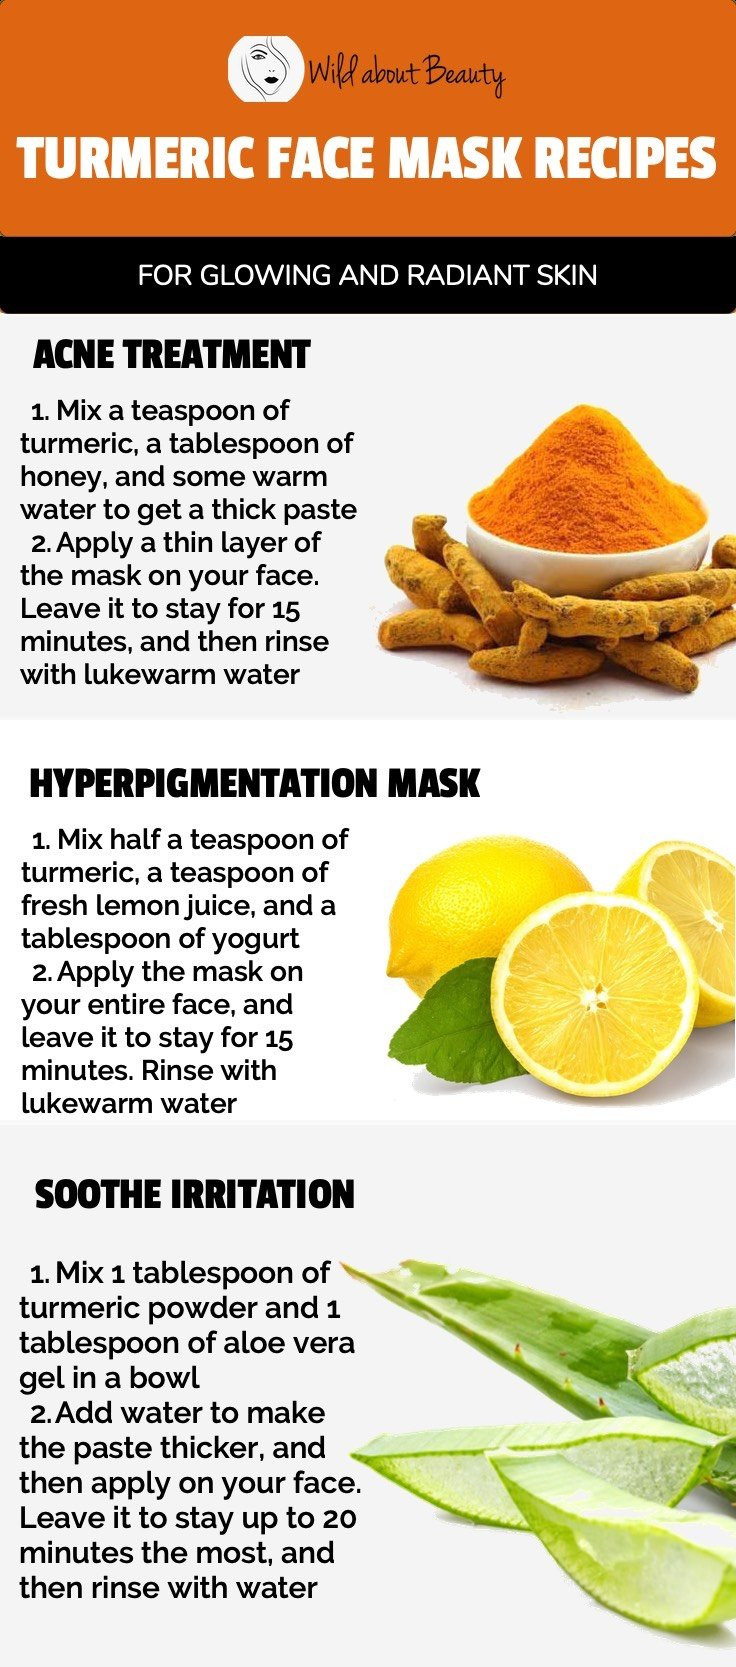 Turmeric Mask DIY
 Try These Turmeric Face Mask Recipes For Glowing and